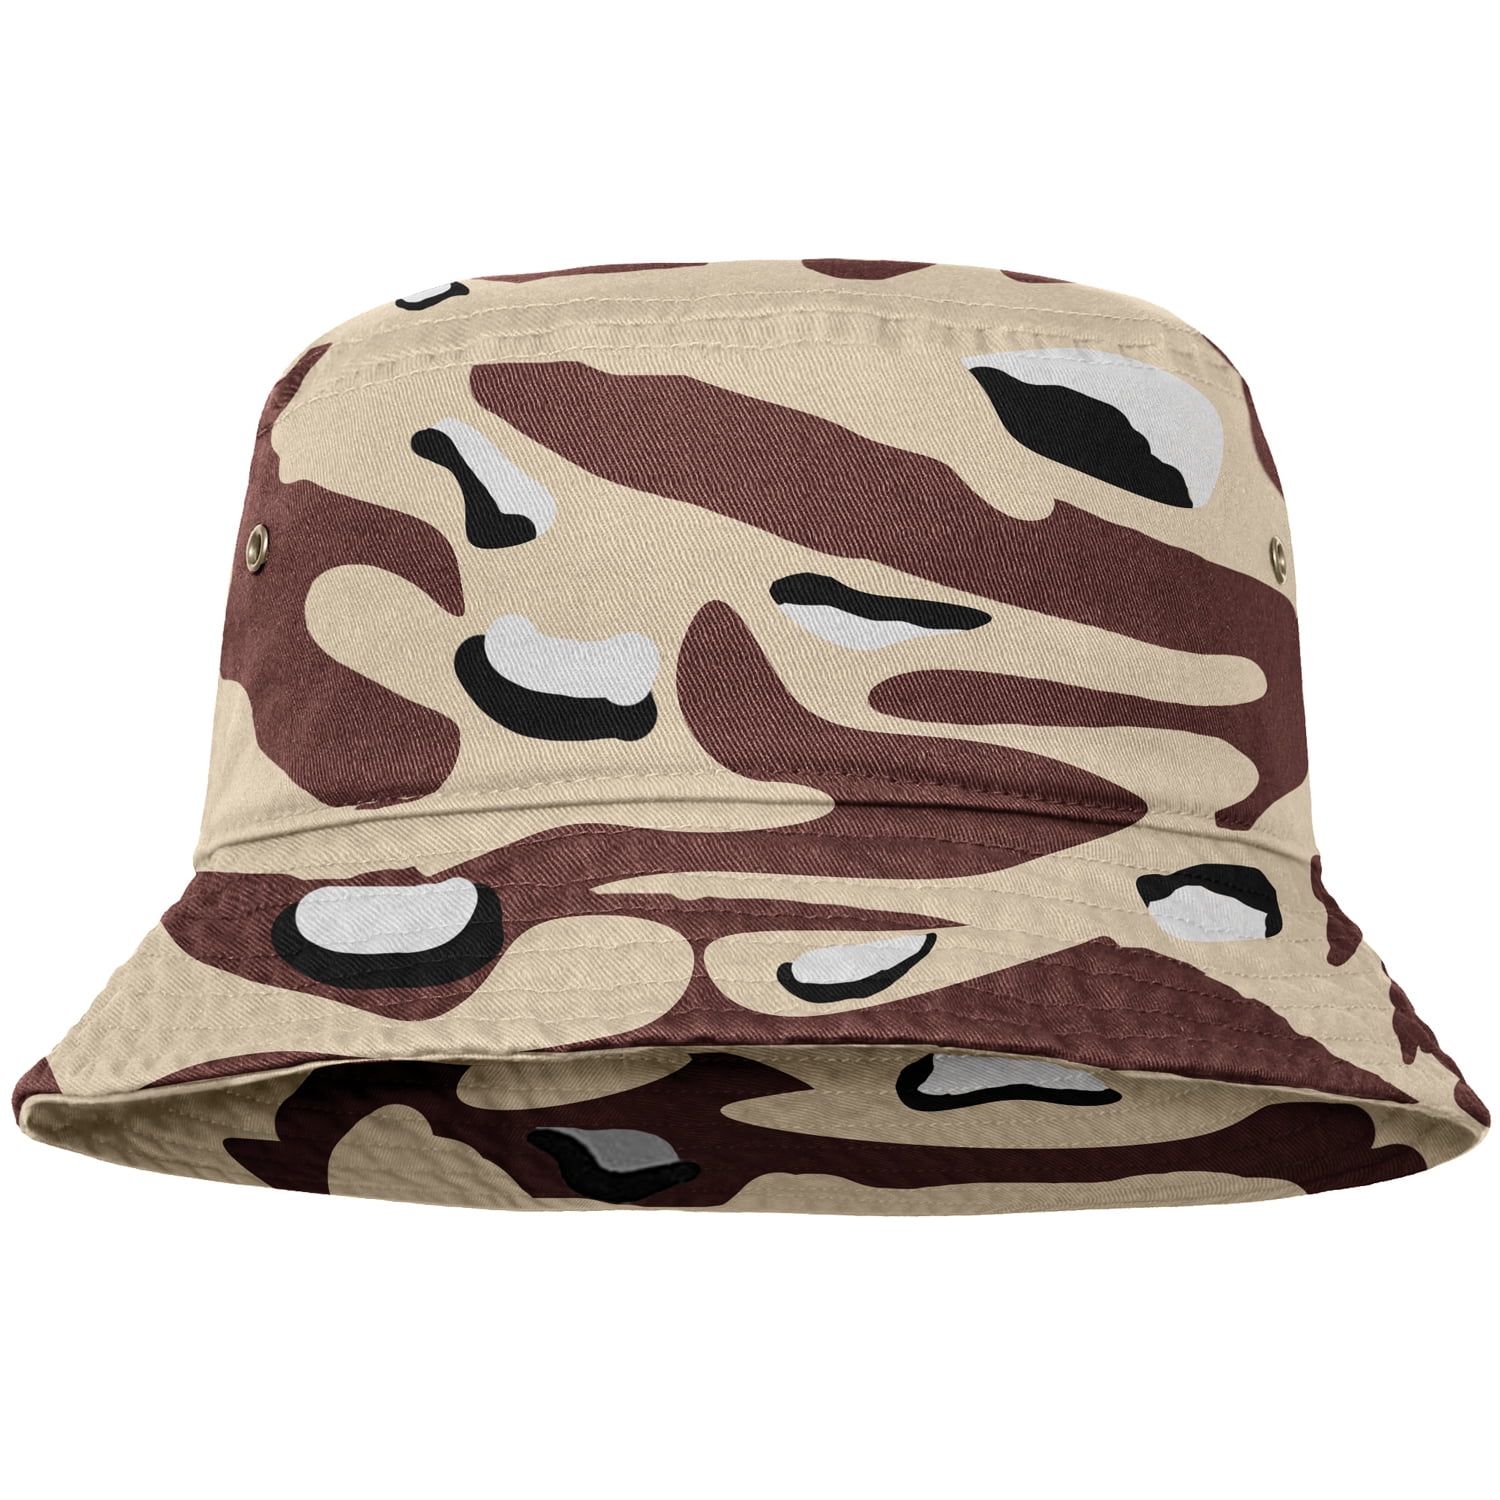 Stylish Unisex Jennie Bucket Hat For Spring And Summer Fishing Foldable Bob  Style With Flat Cap For Men And Women From Redstar080, $25.1